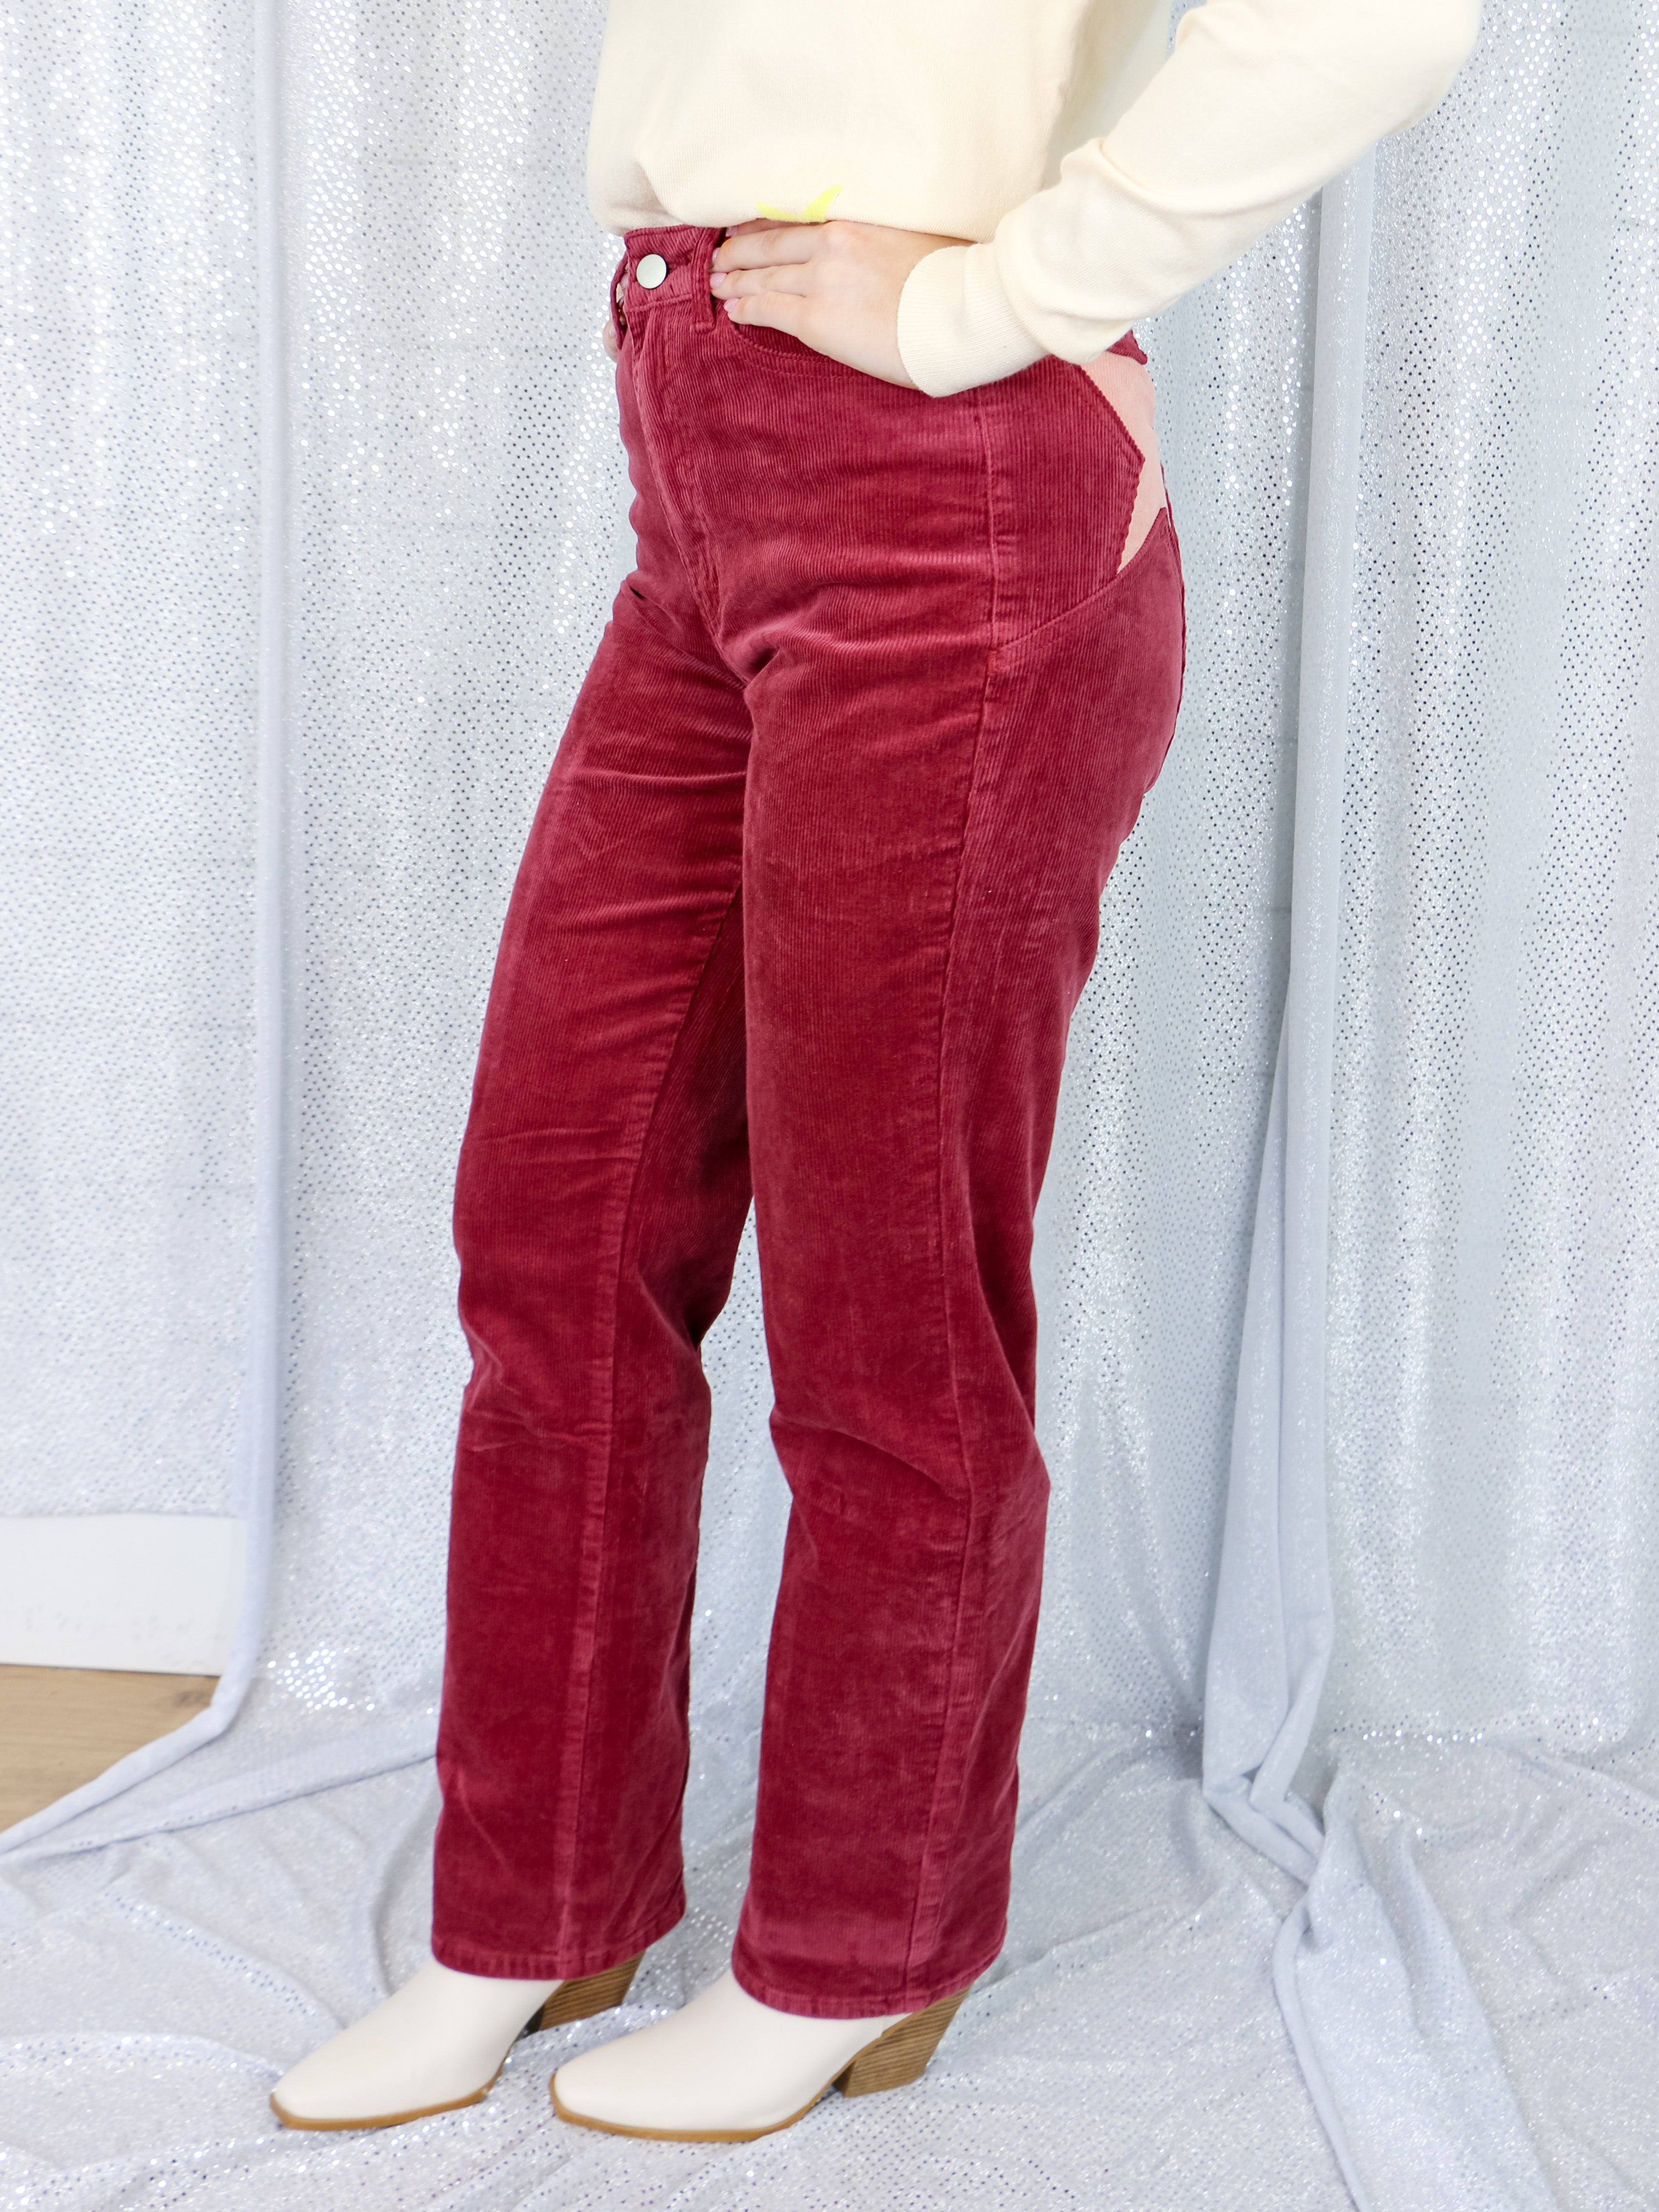 Star Of The Night Pants in Burgundy